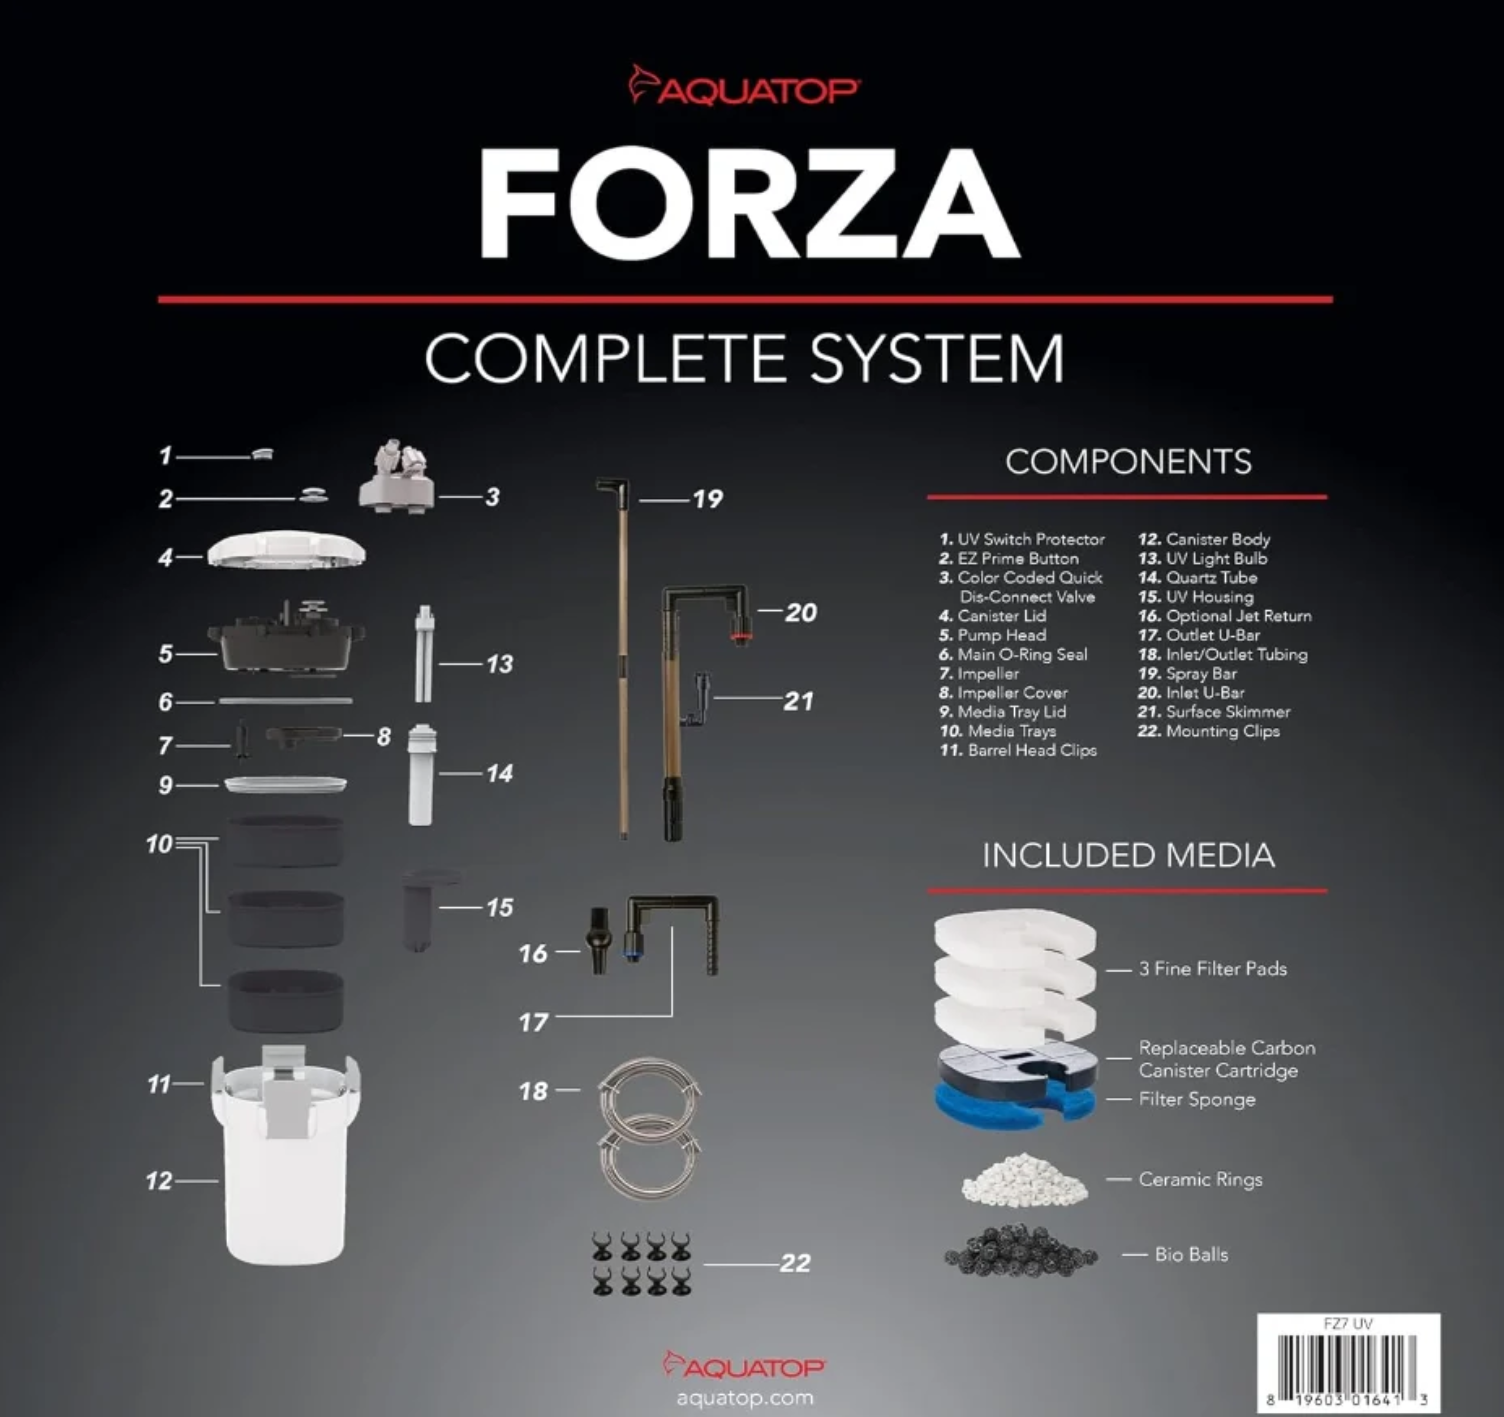 Aquatop Forza UV Canister Filter with Sterilizer